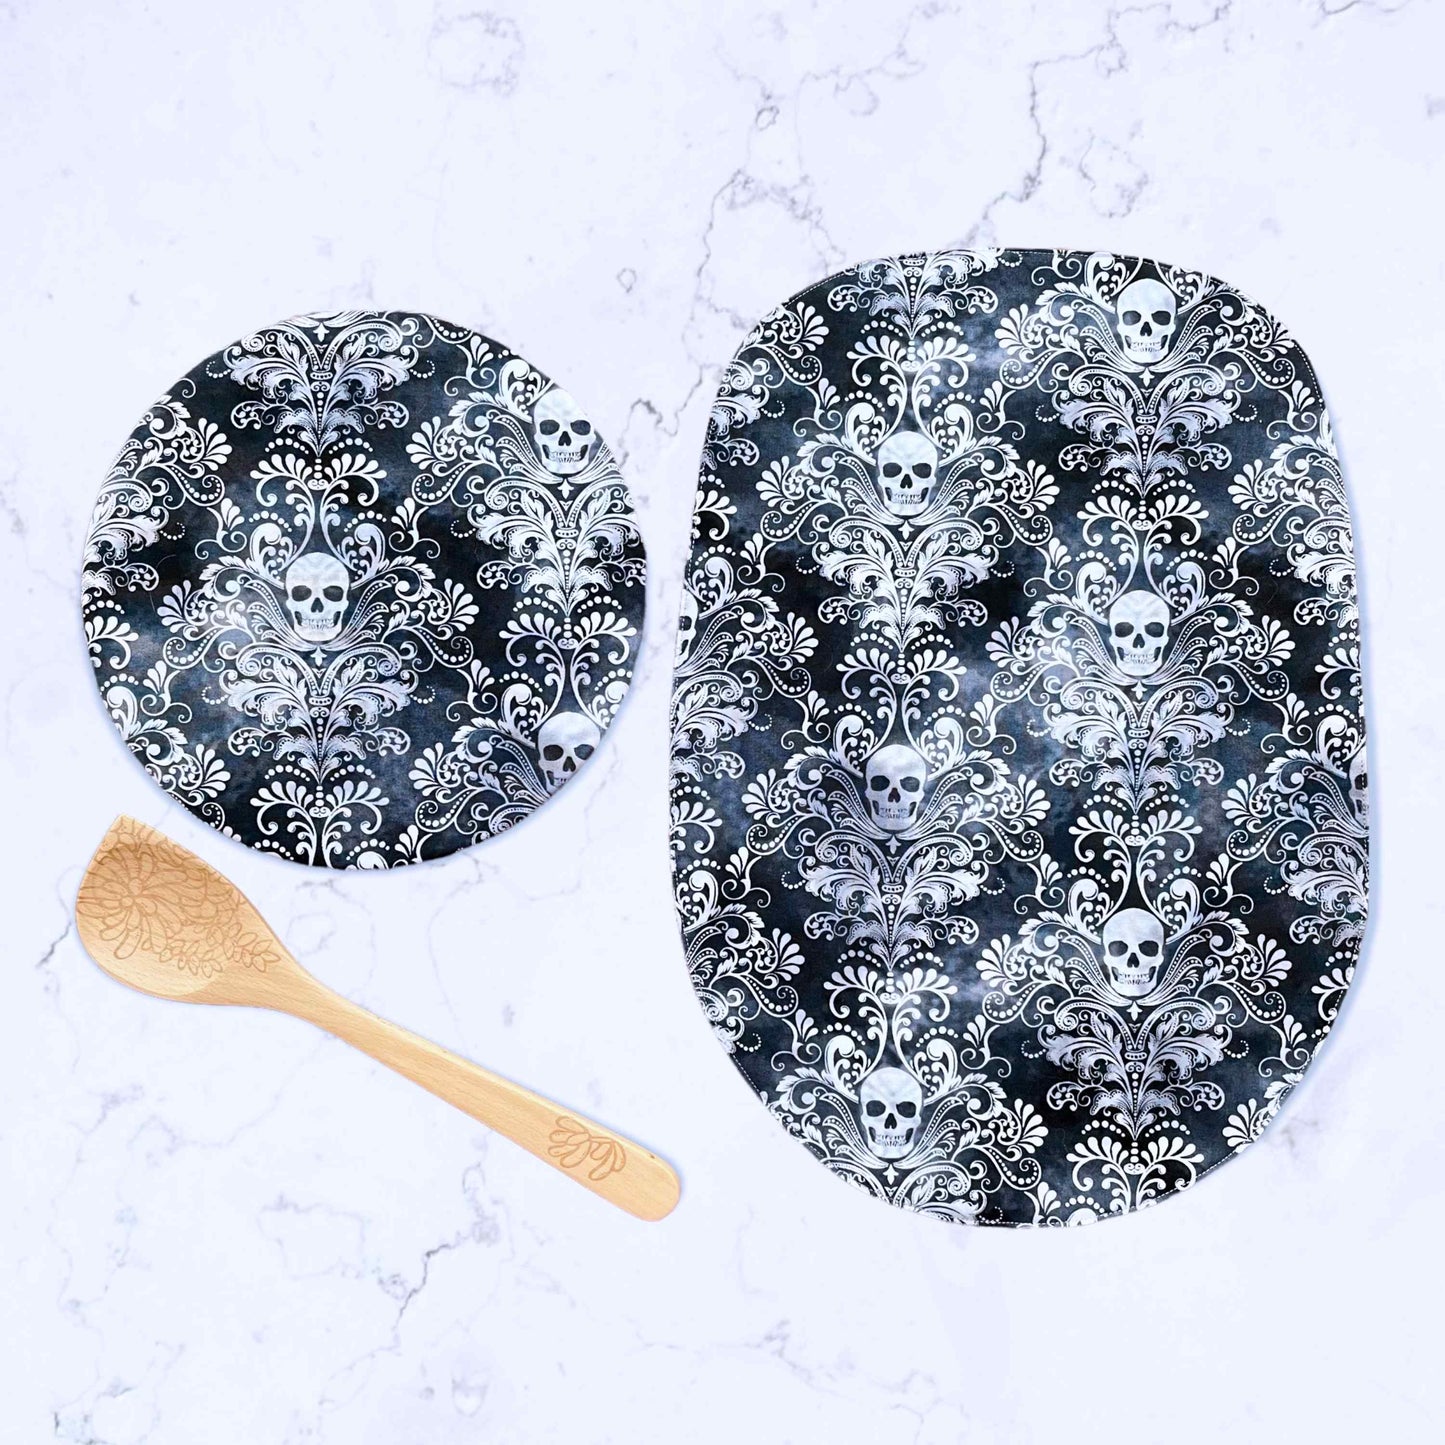 Stand Mixer Bowl Covers -  Skull Damask